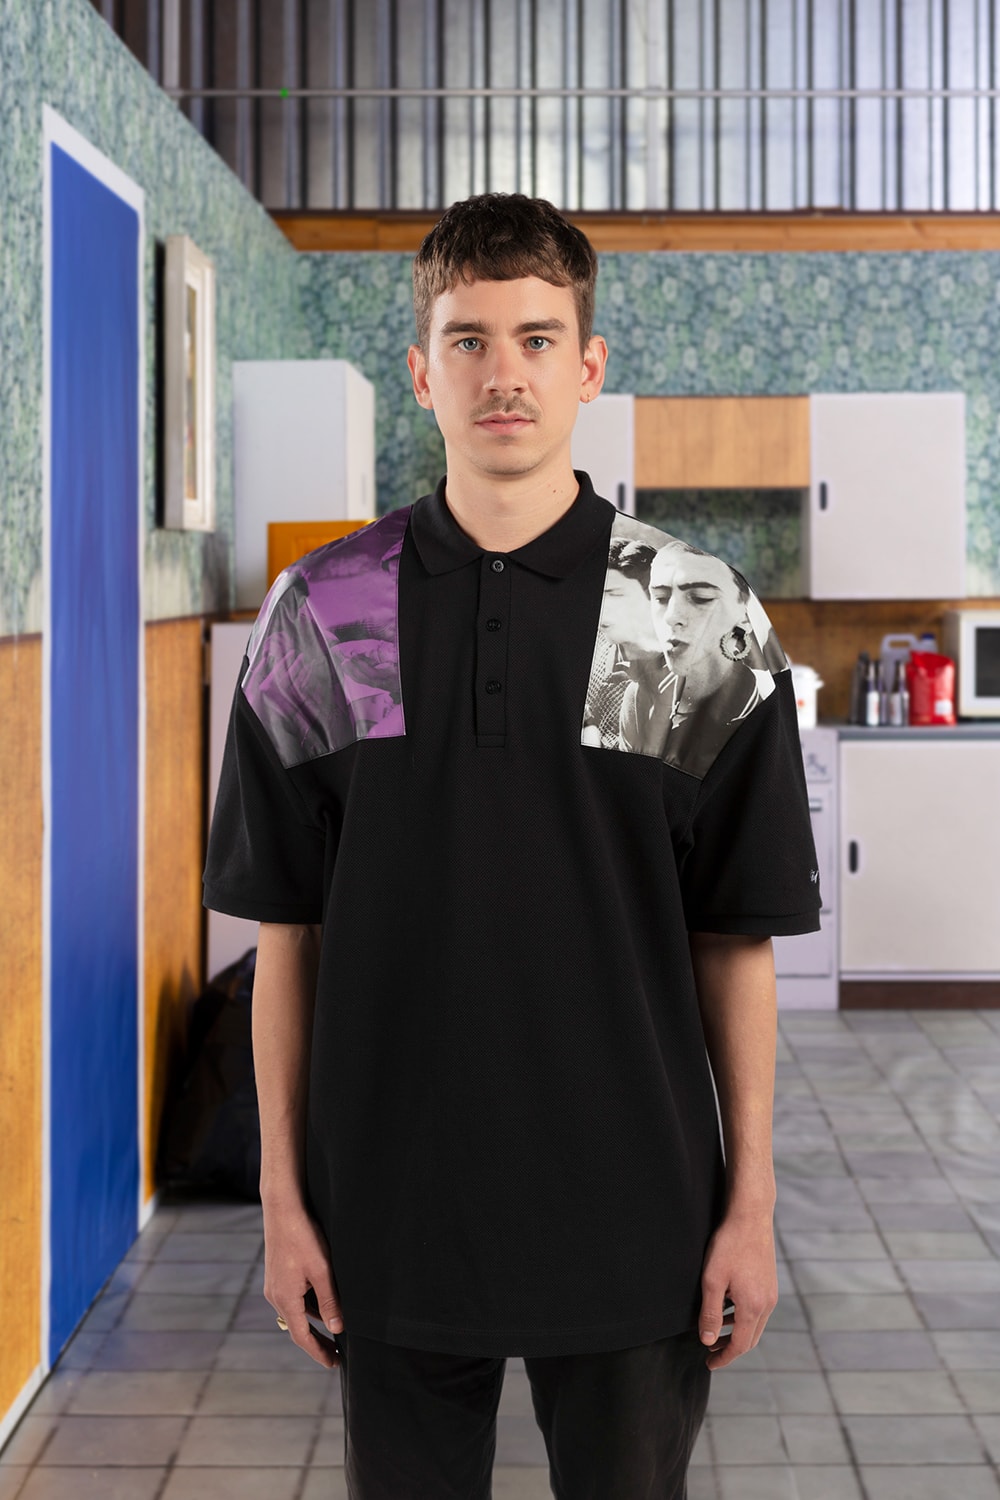 Raf Simons fred perry collection spring summer 2020 release information buy cop purchase gavin watson polo shirt hoodie coach jacket t-shirt